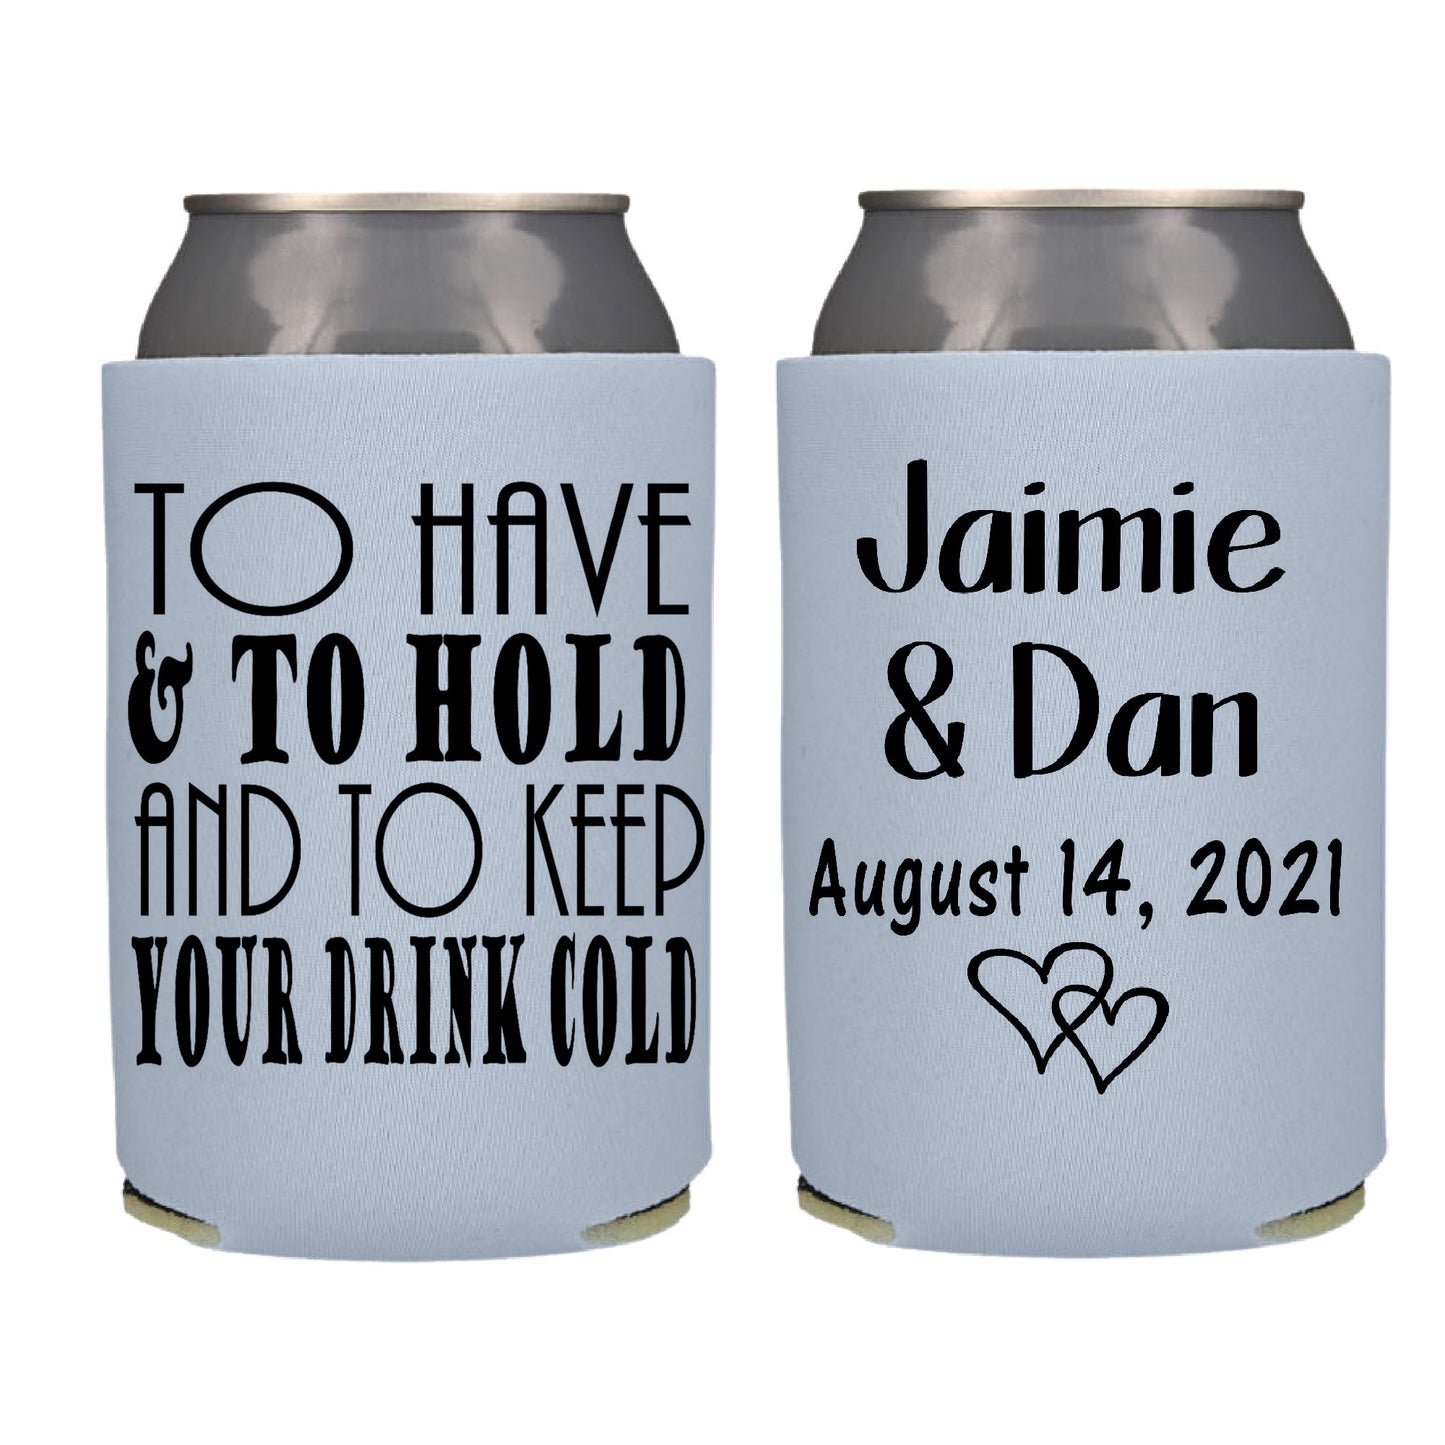 To Have and To Hold and to Keep Your Drink Cold Screen Printed Can Cooler freeshipping - Be Vocal Designs